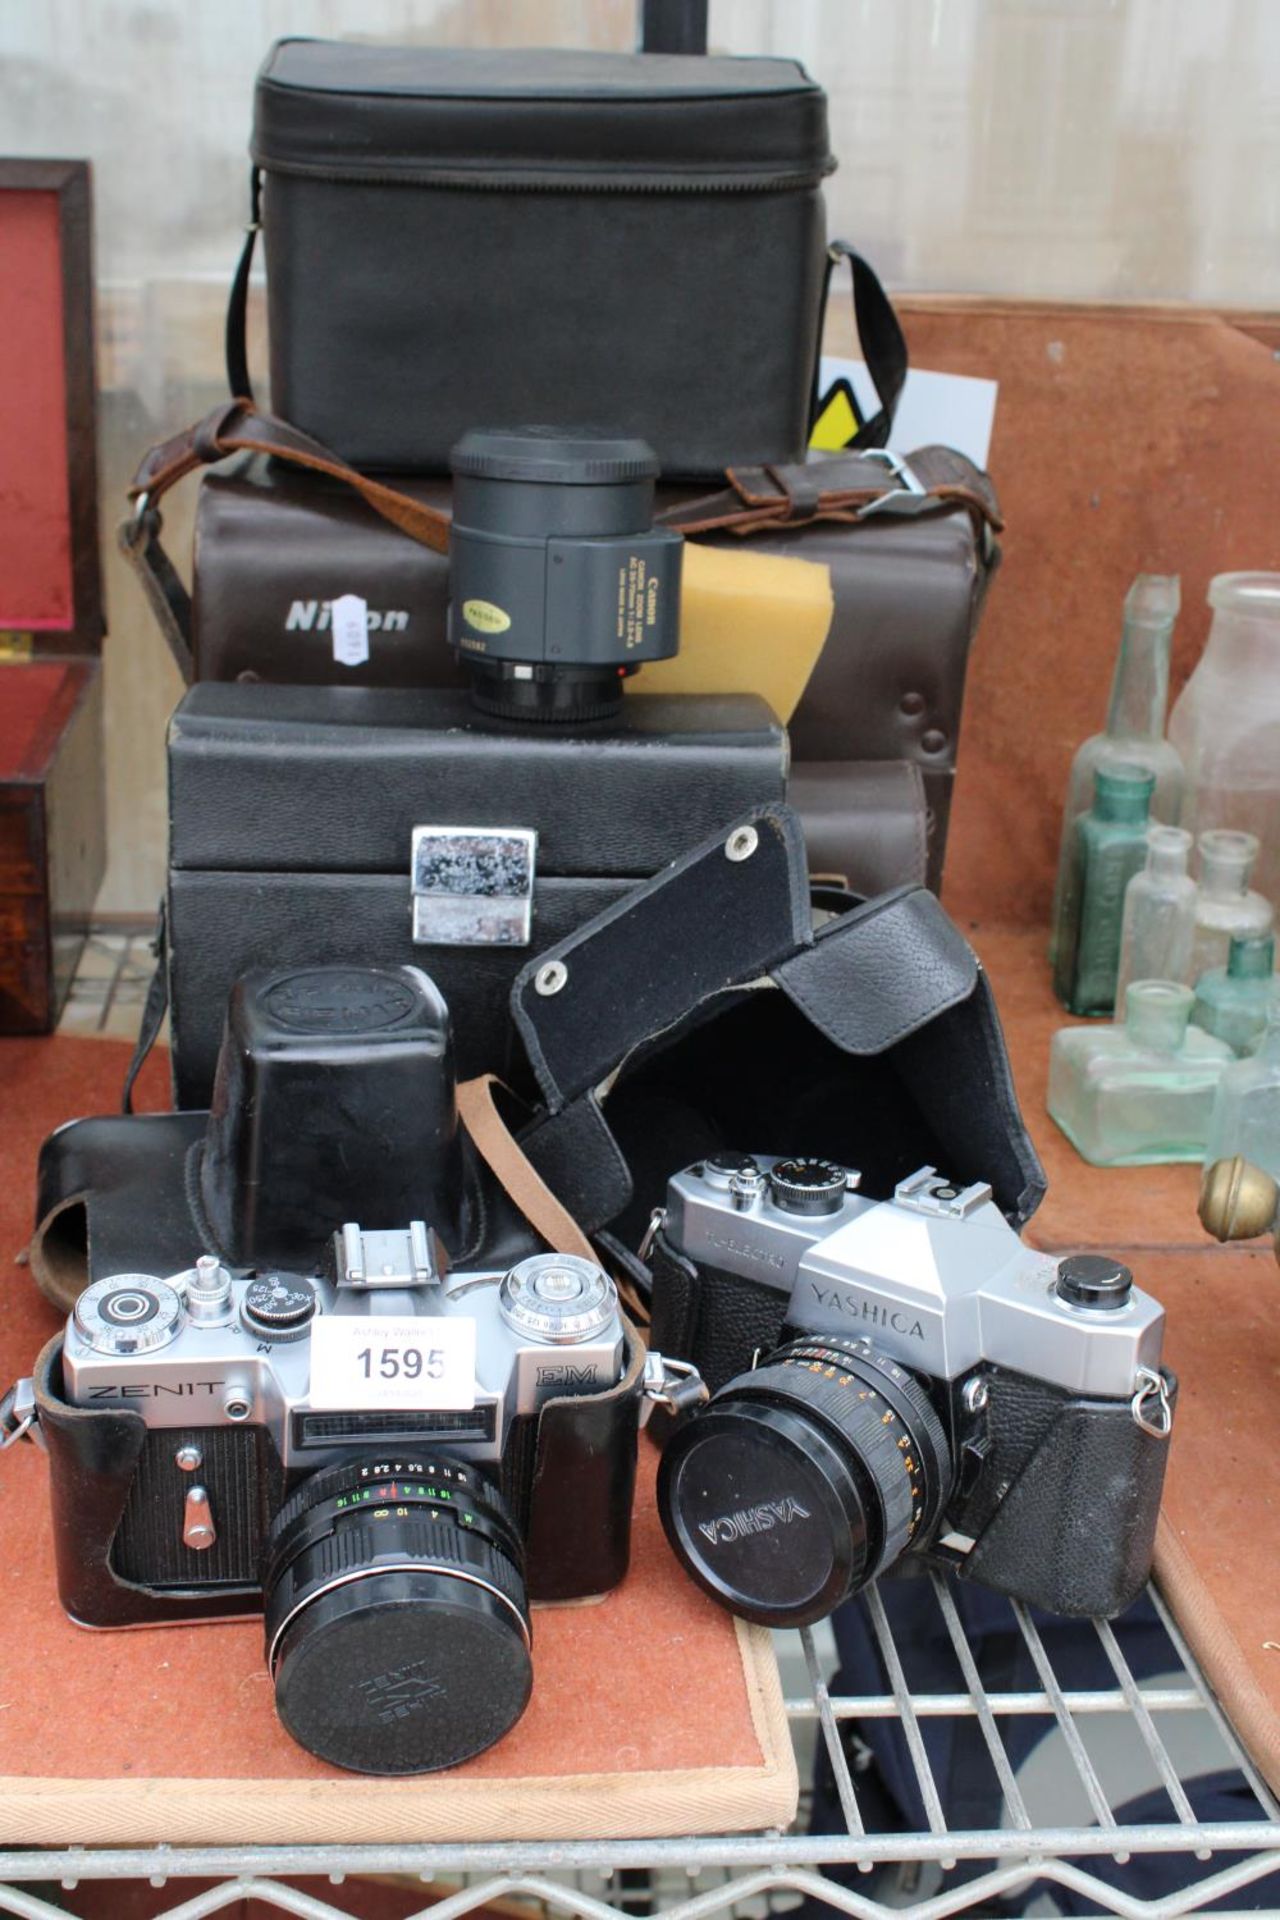 AN ASSORTMENT OF CAMERA EQUIPMENT TO INCLUDE A ZENIT CAMERA, YASHICA CAMERA AND A CANON ZOOM LENS